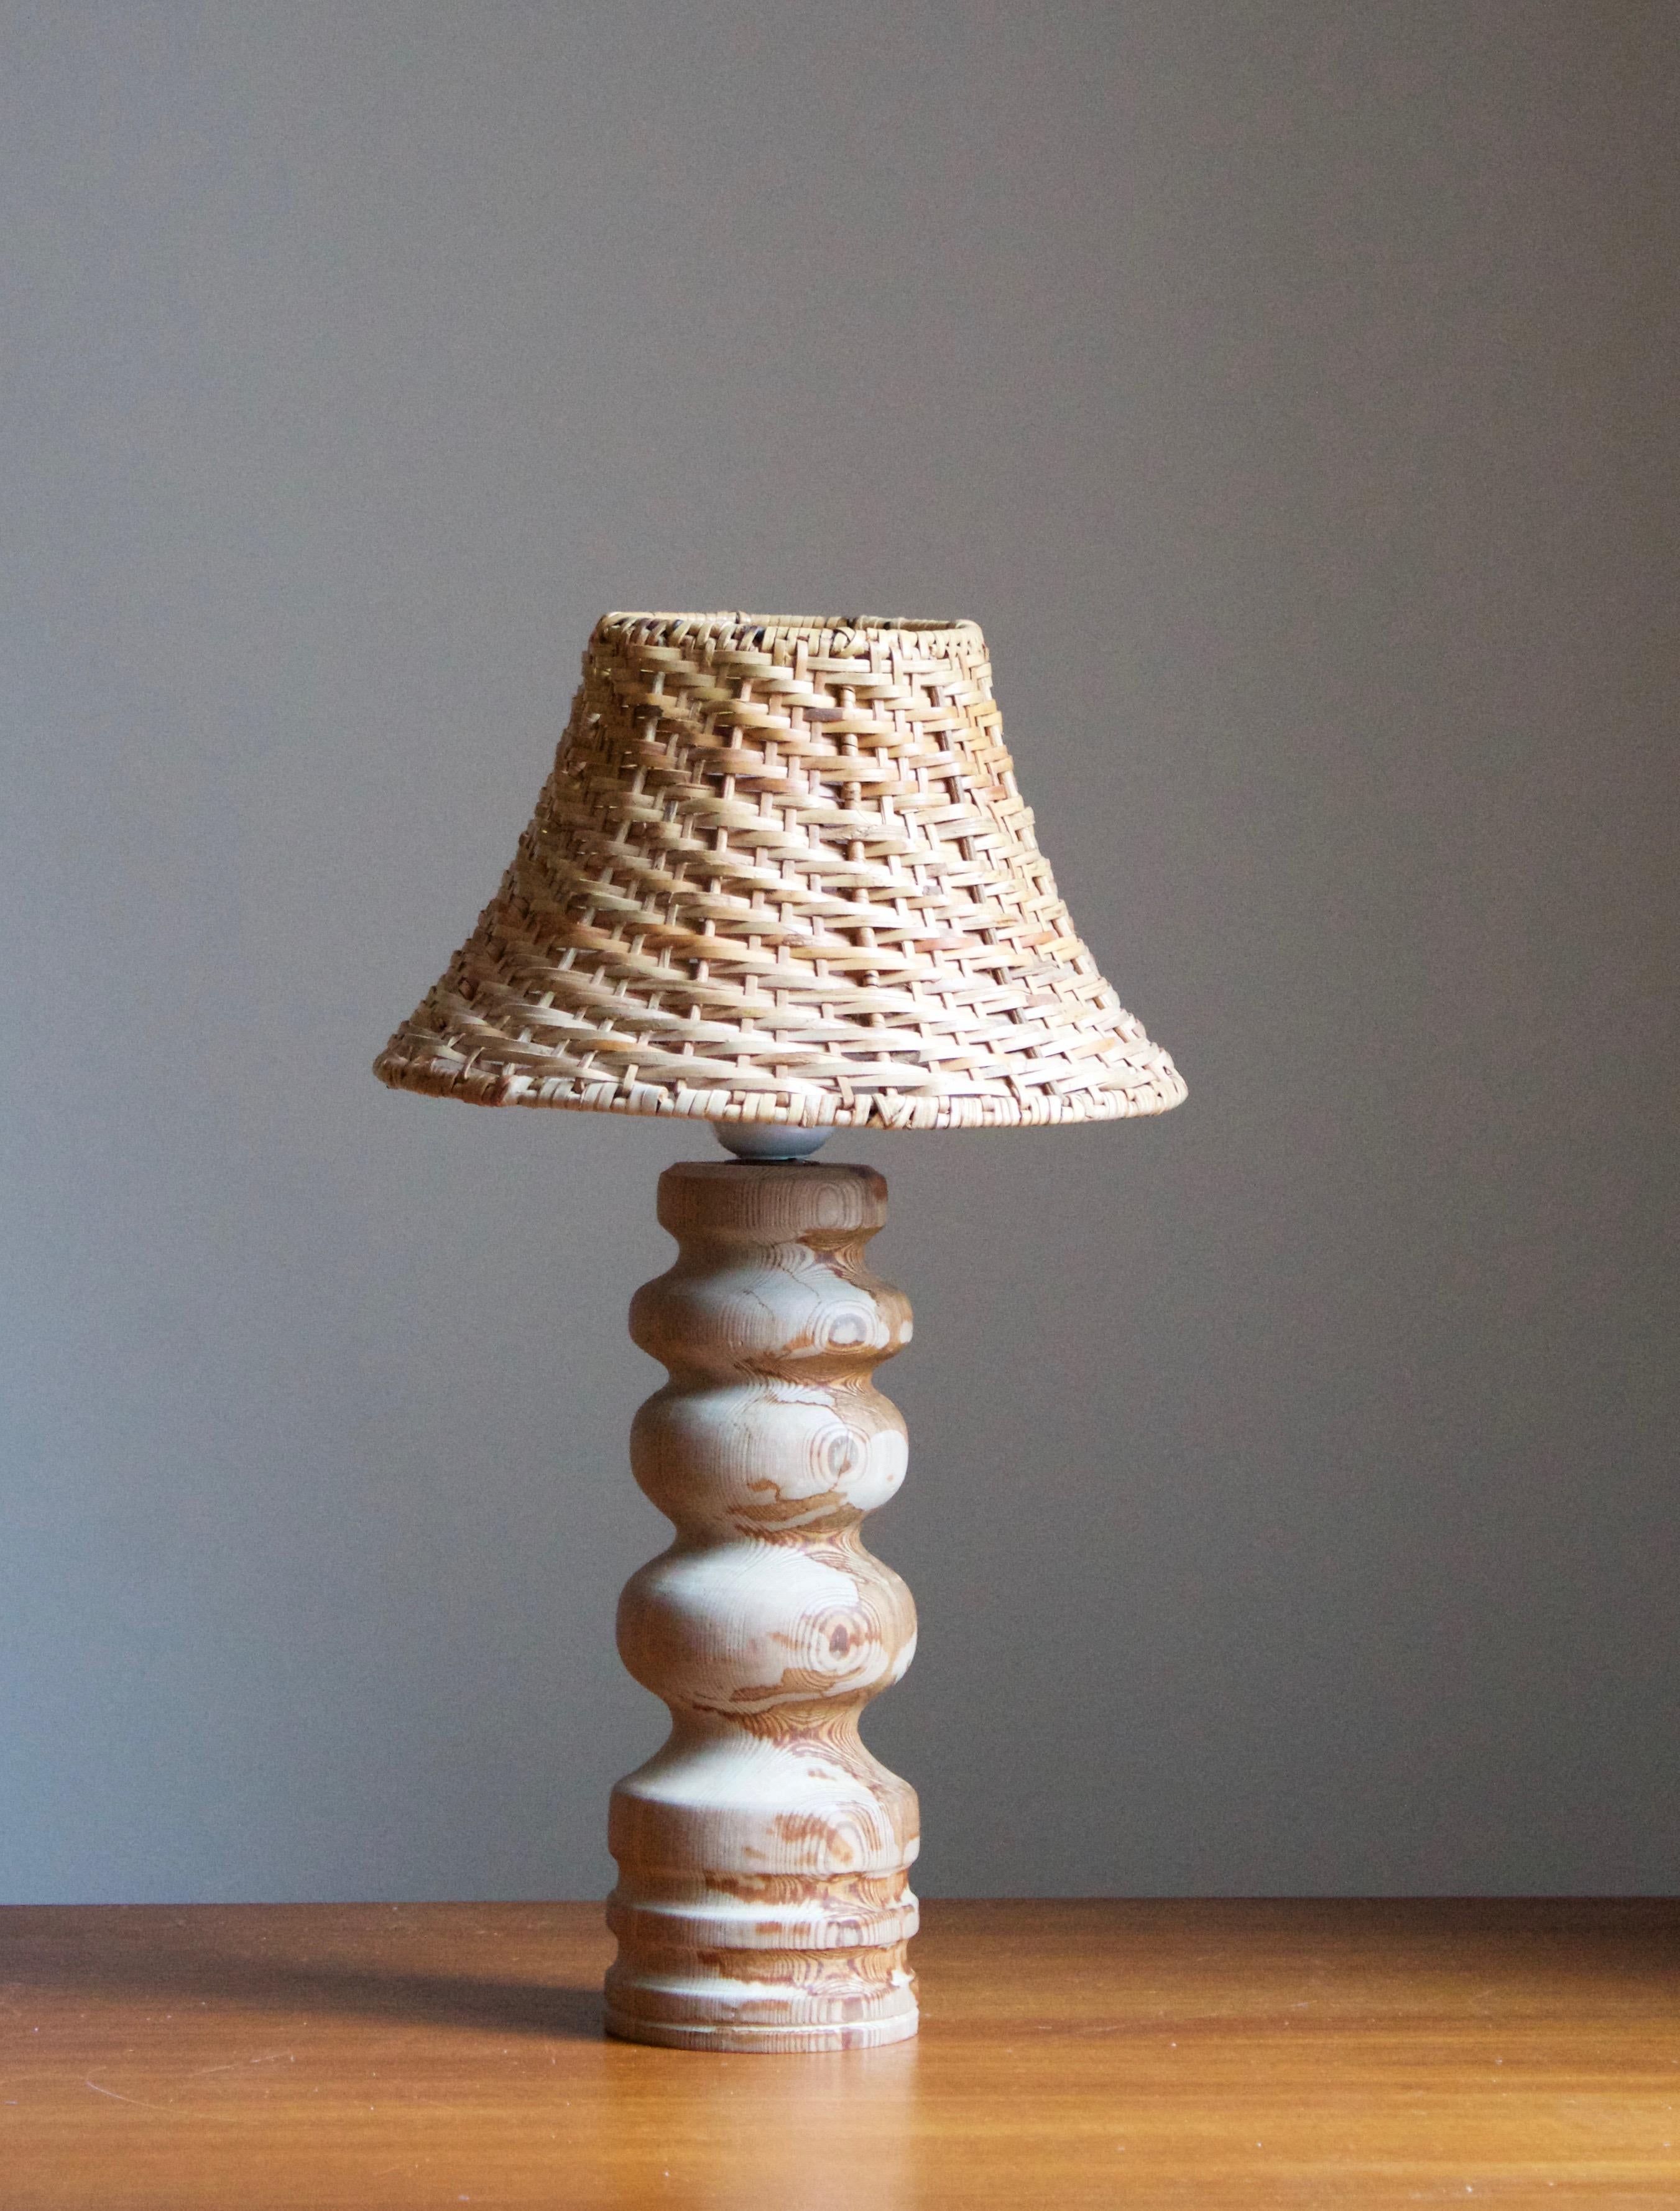 A table lamp designed and produced in Sweden, 1970s. 

Stated dimensions exclude lampshades, height includes socket. Upon request illustrated model rattan lampshades can be included in purchase.